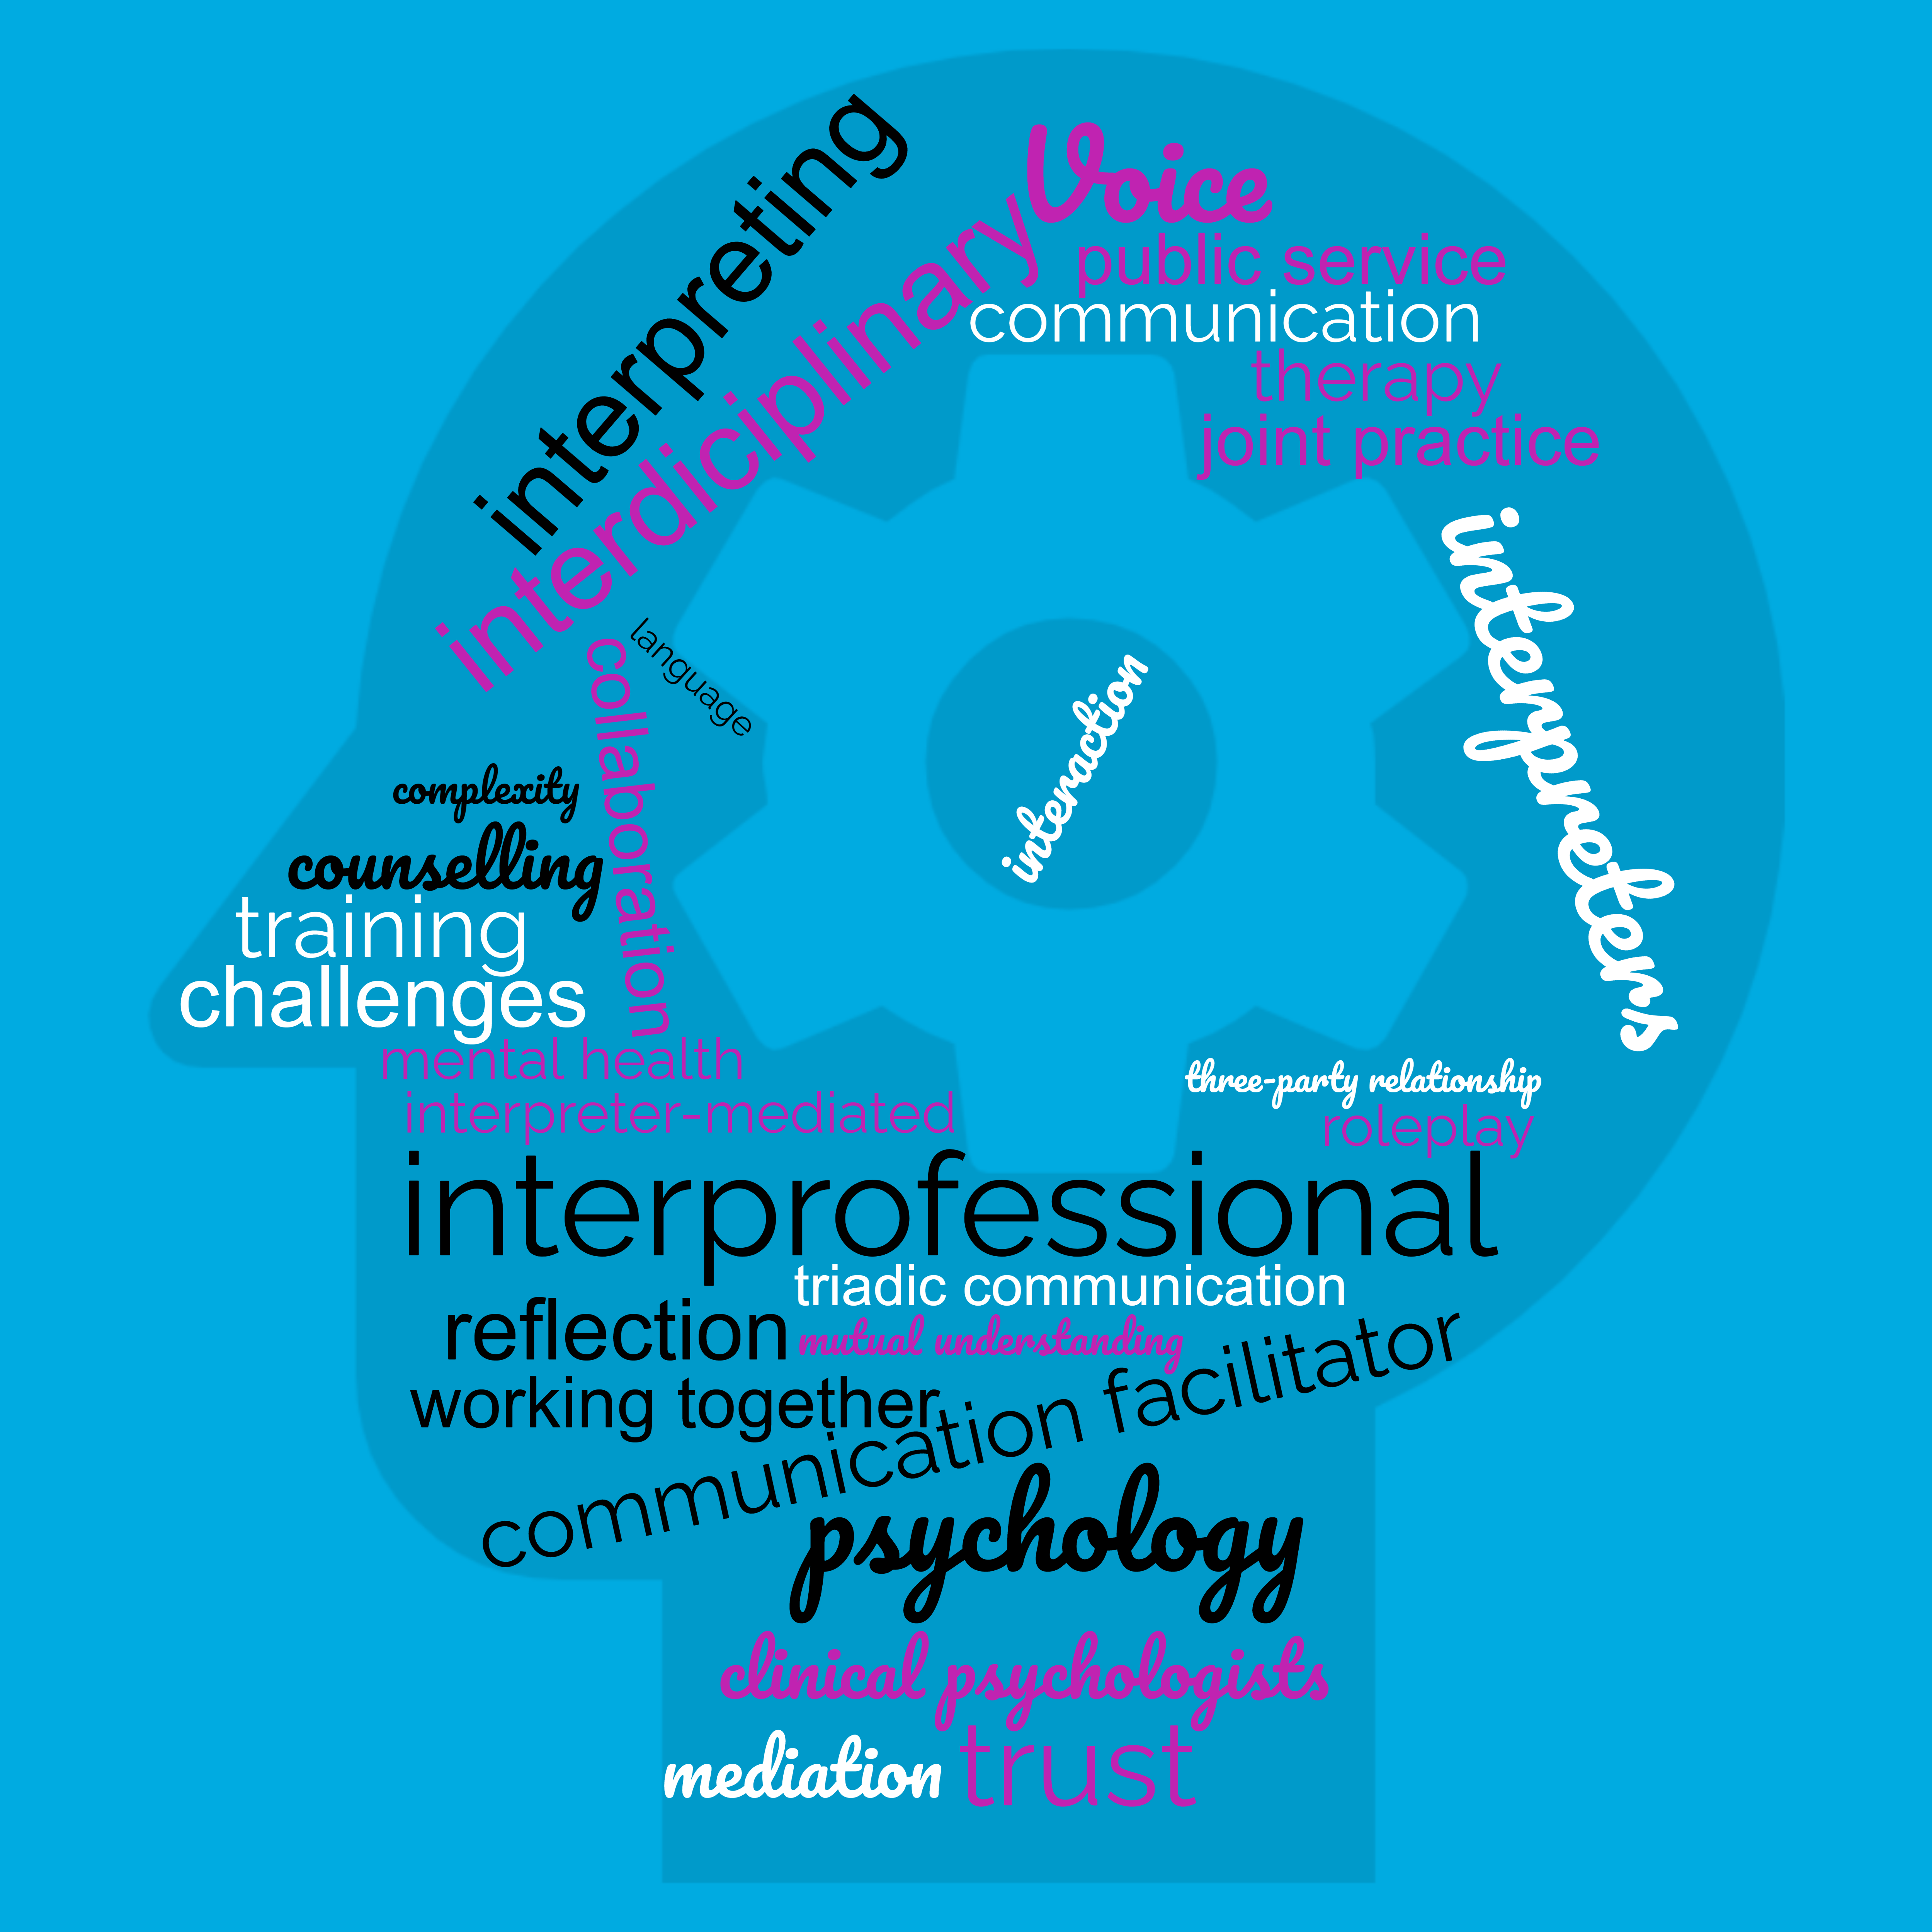 An image of the head consisting of text relating to the project such as interdiciplinary and communication facilitator